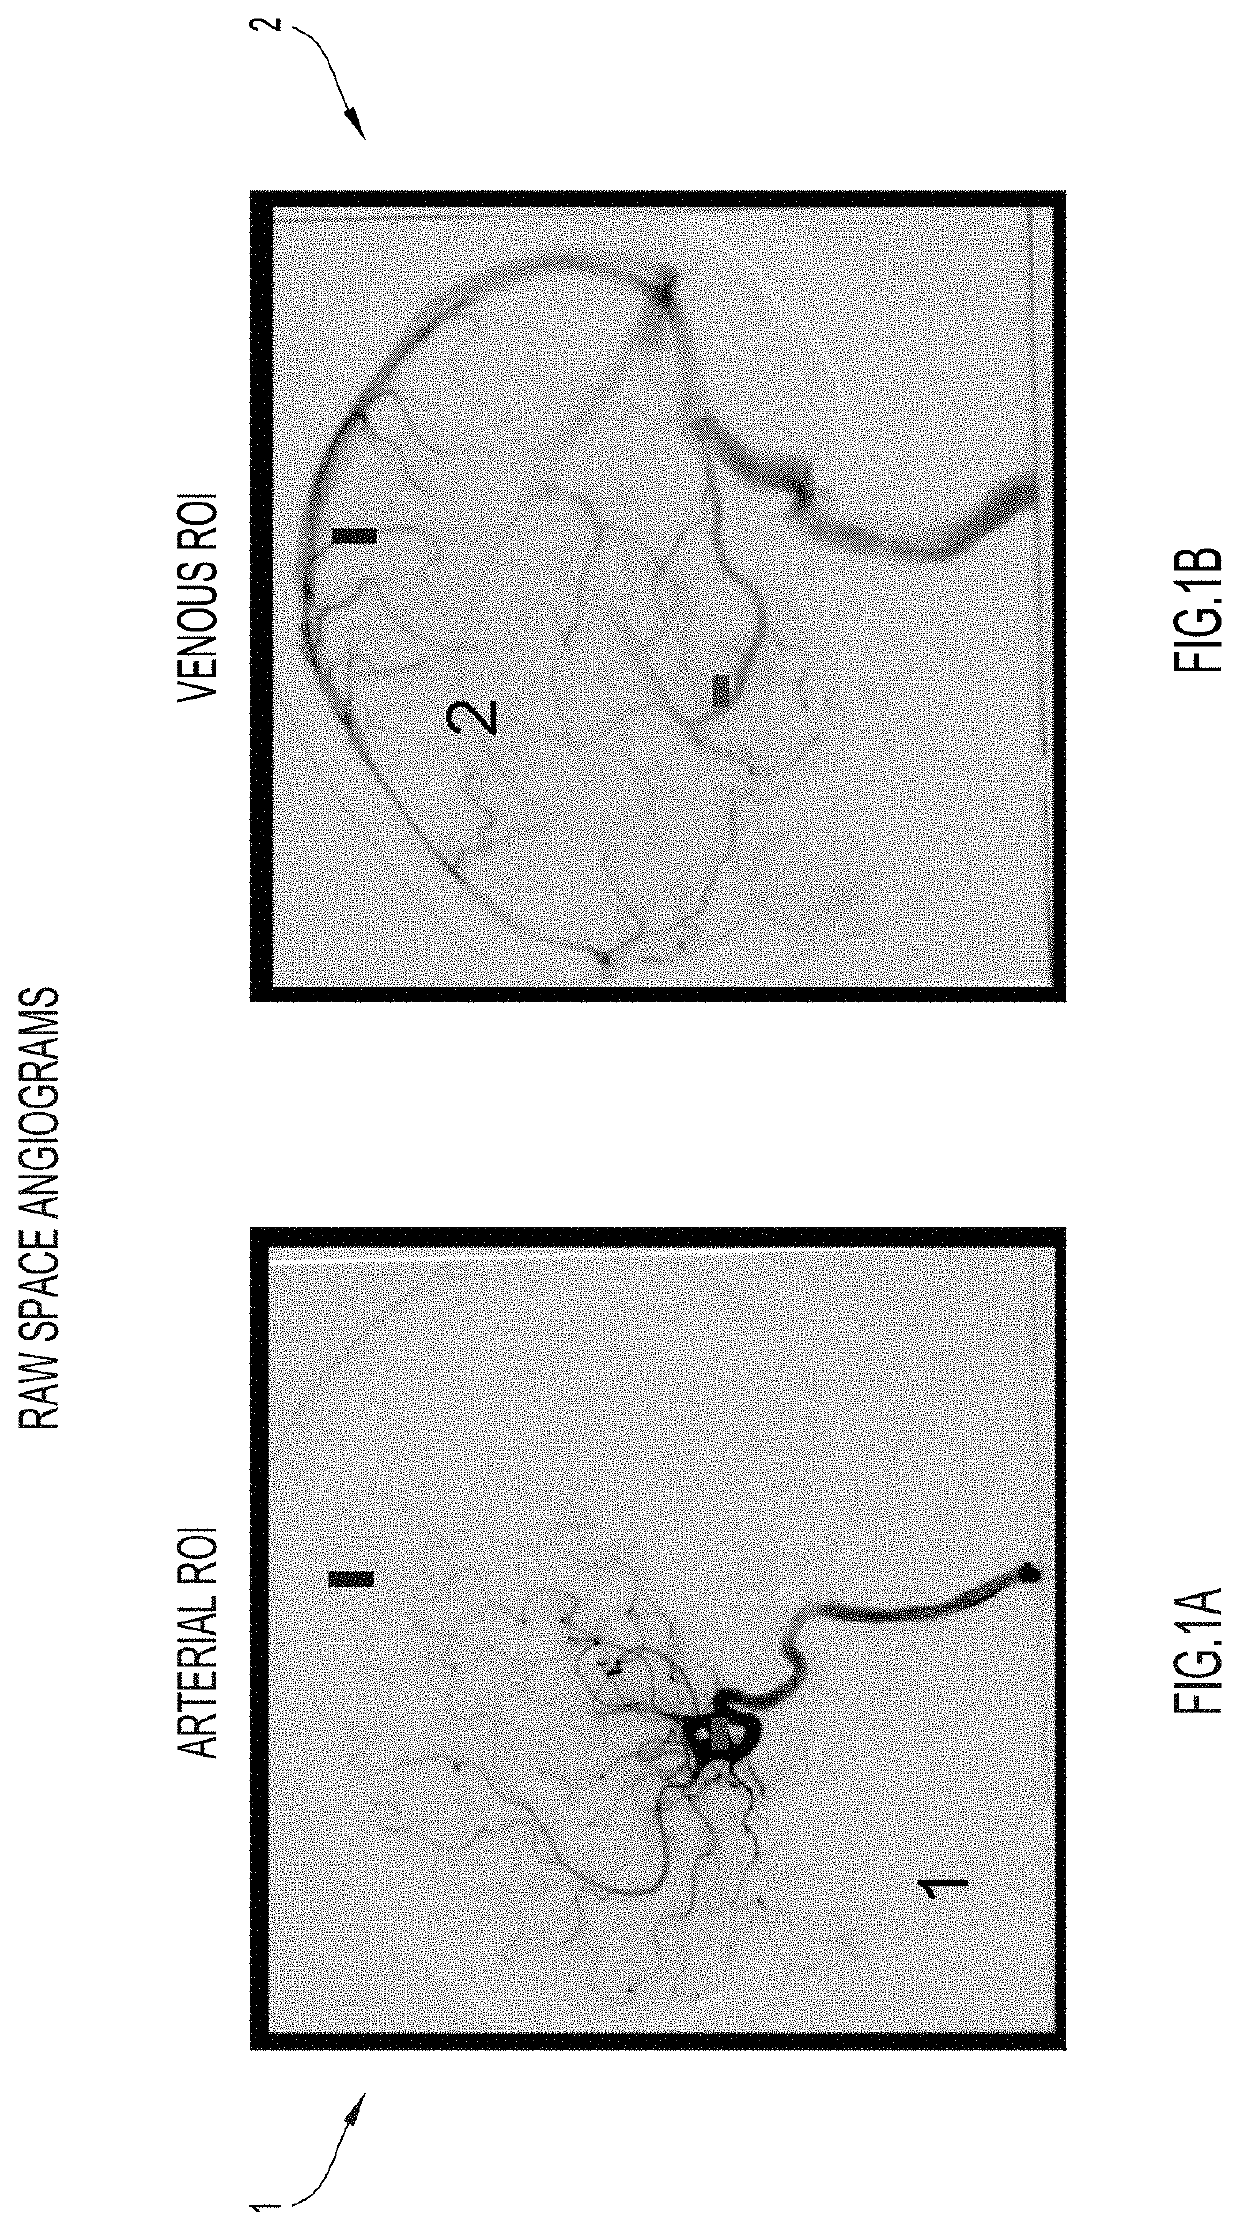 Spatiotemporal reconstruction in higher dimensions of a moving vascular pulse wave from a plurality of lower dimensional angiographic projections